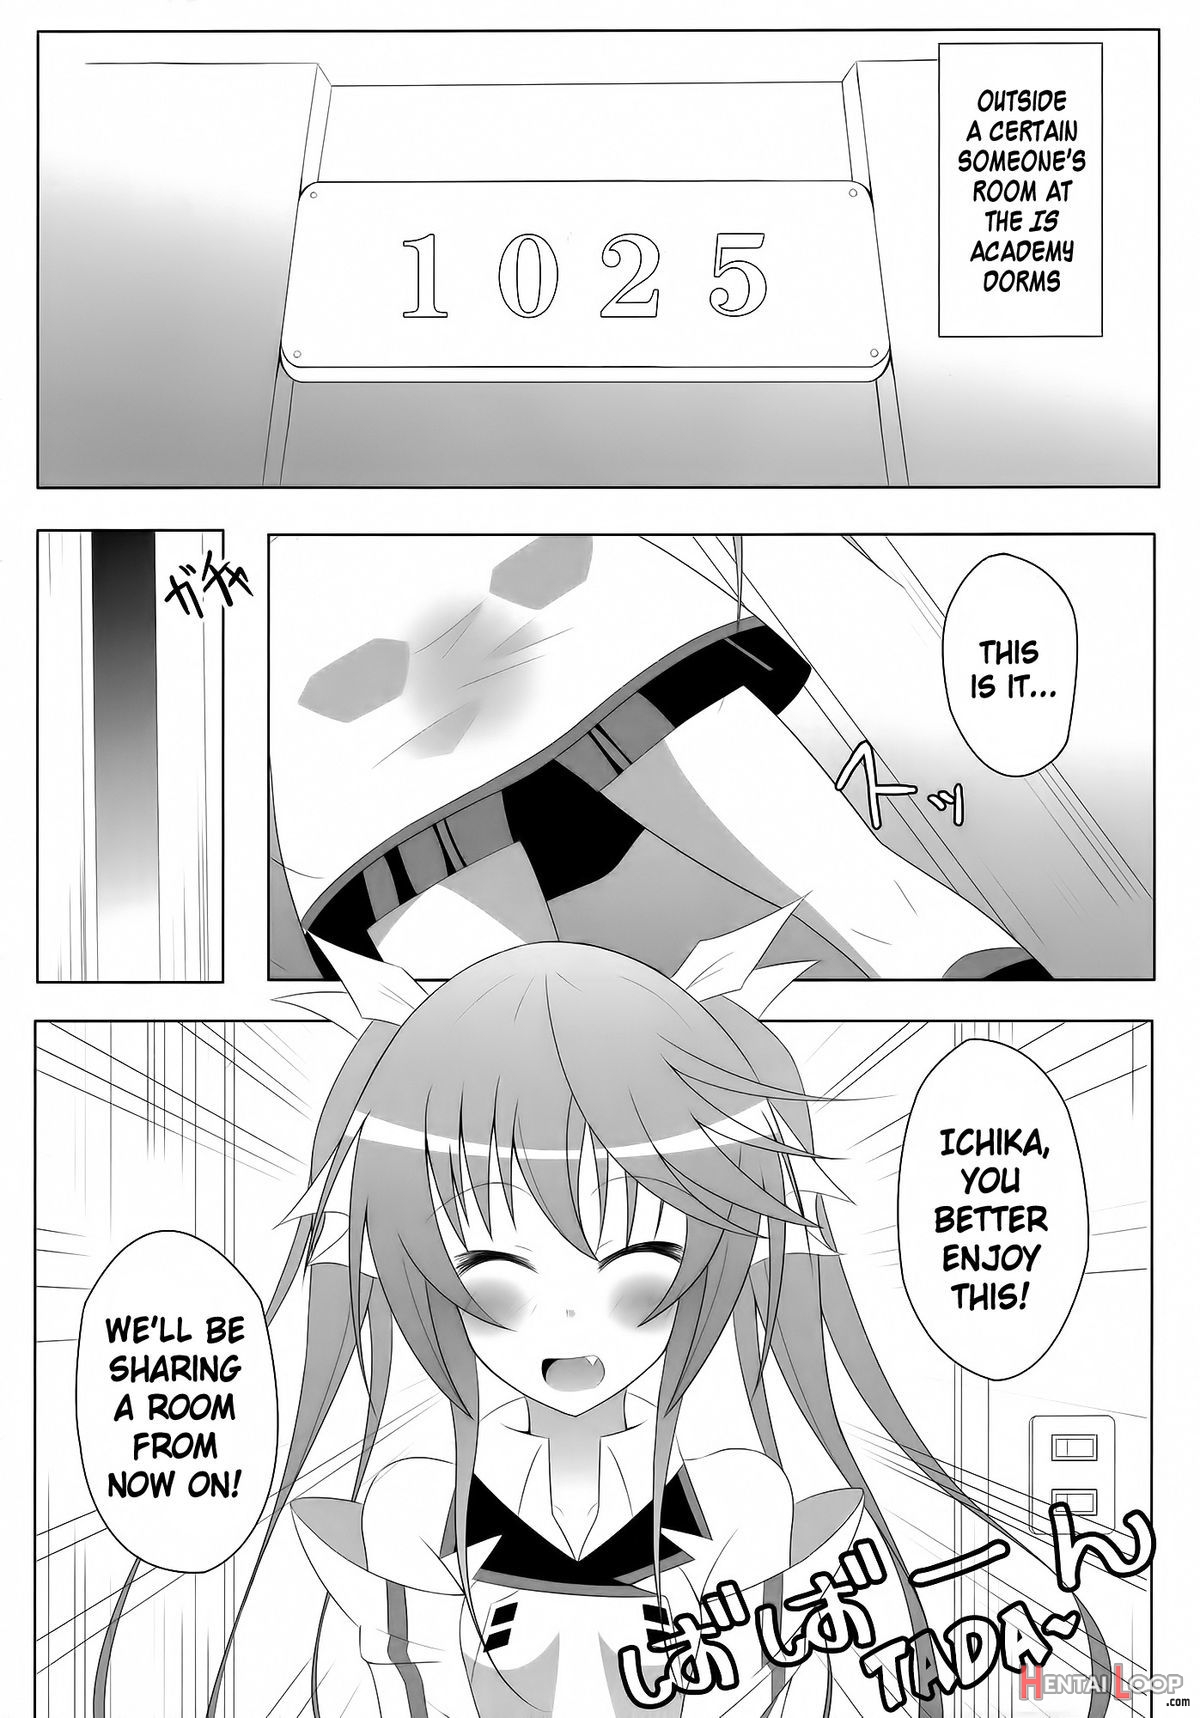 Ichika, You Better Take Responsibility! Second page 4